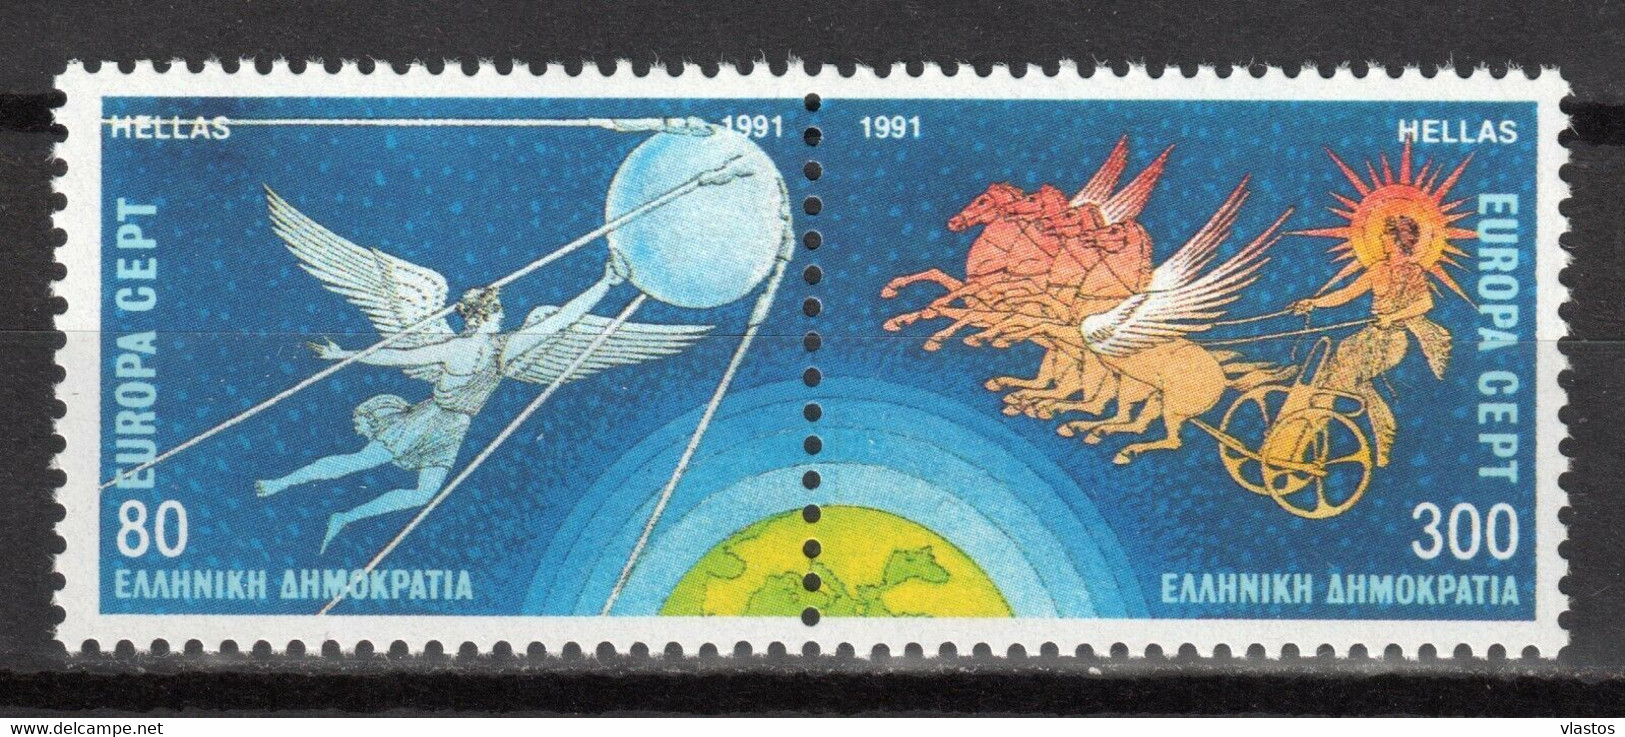 GREECE 1991 COMPLETE YEAR - PERFORATED + IMPERFORATE STAMPS MNH - Años Completos